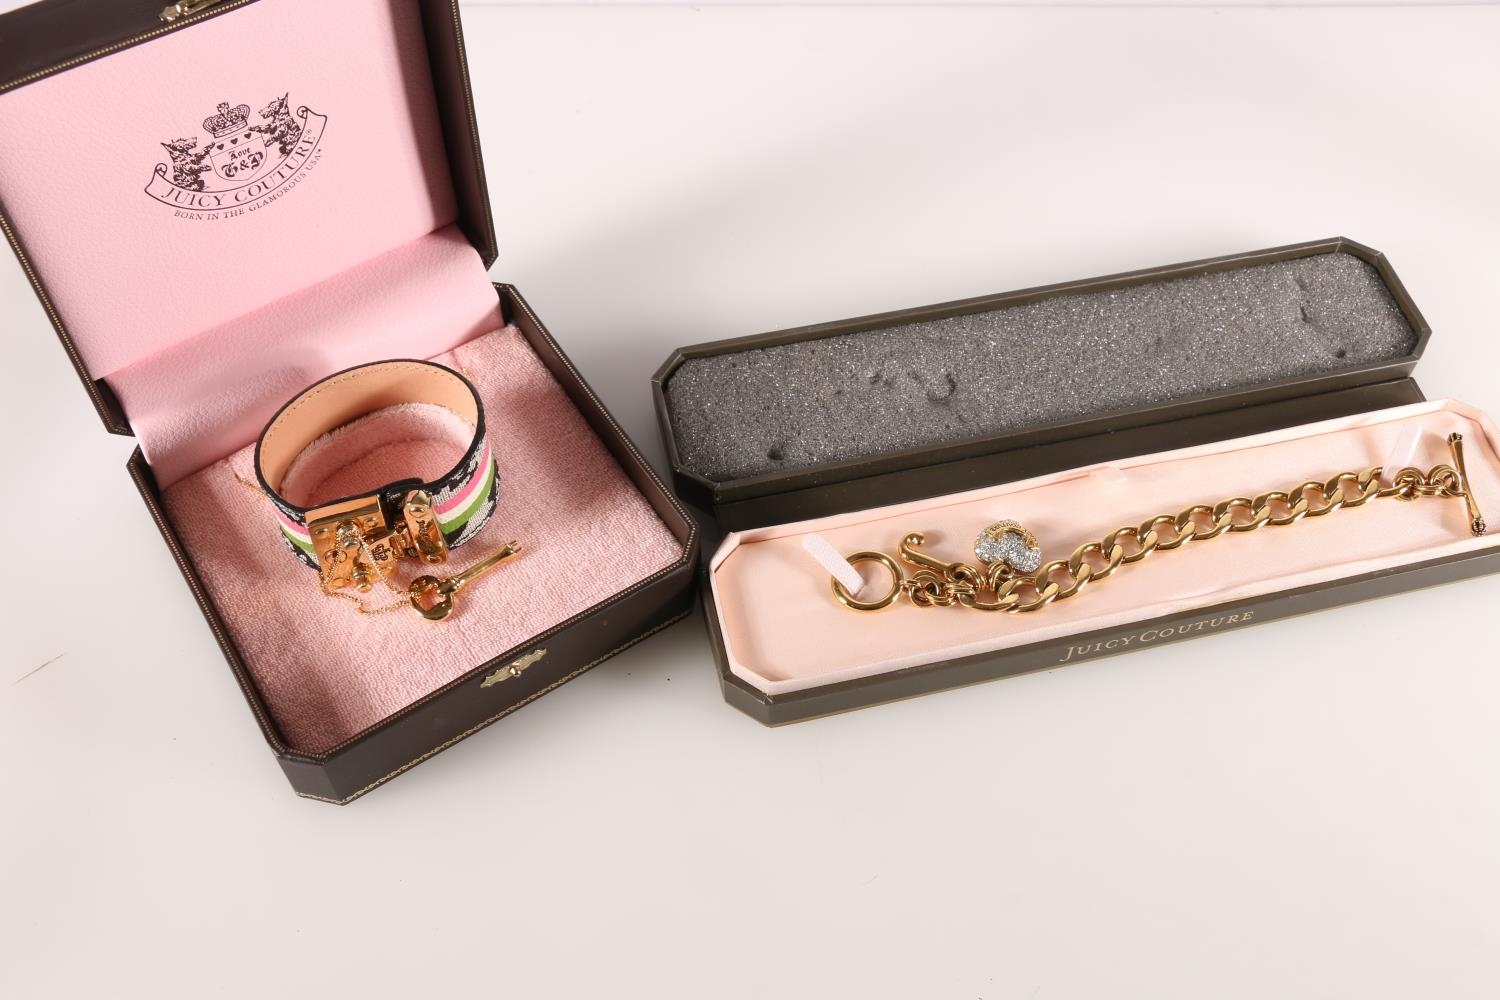 Juicy Couture bracelet of large curb links, in original box with